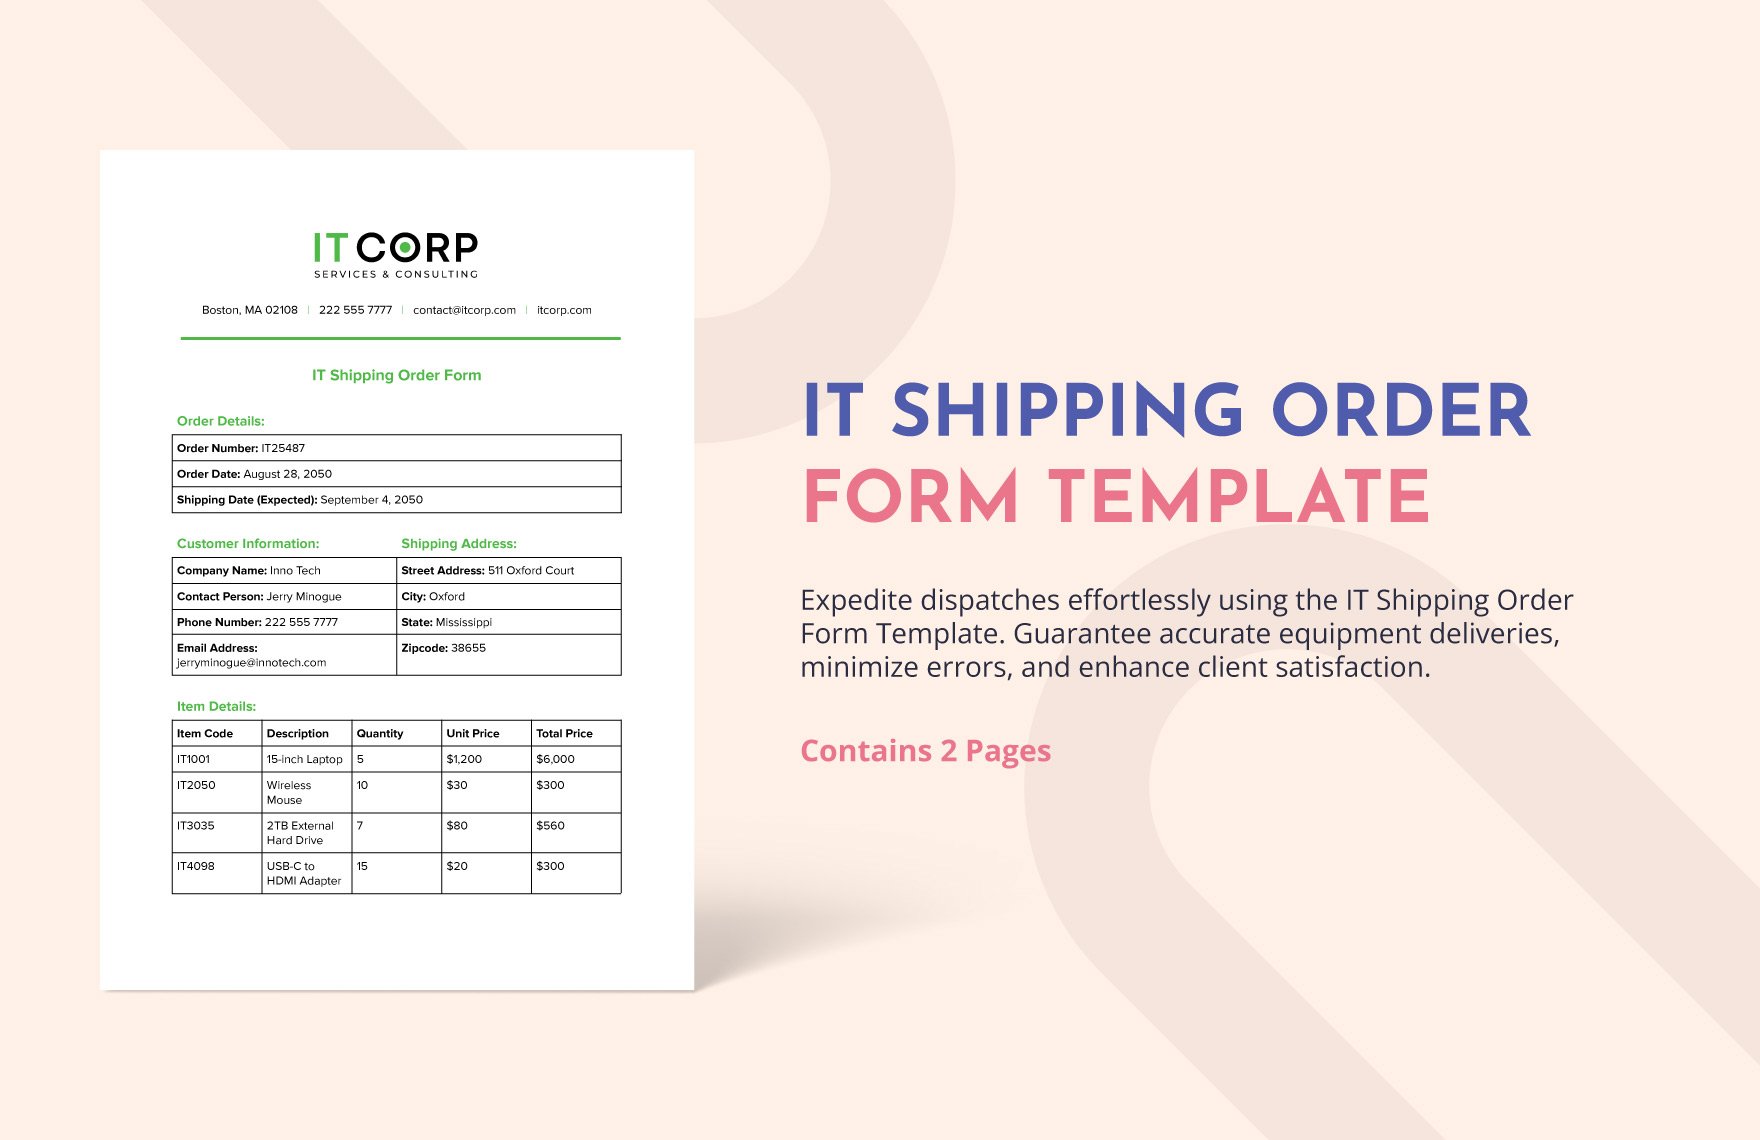 IT Shipping Order Form Template